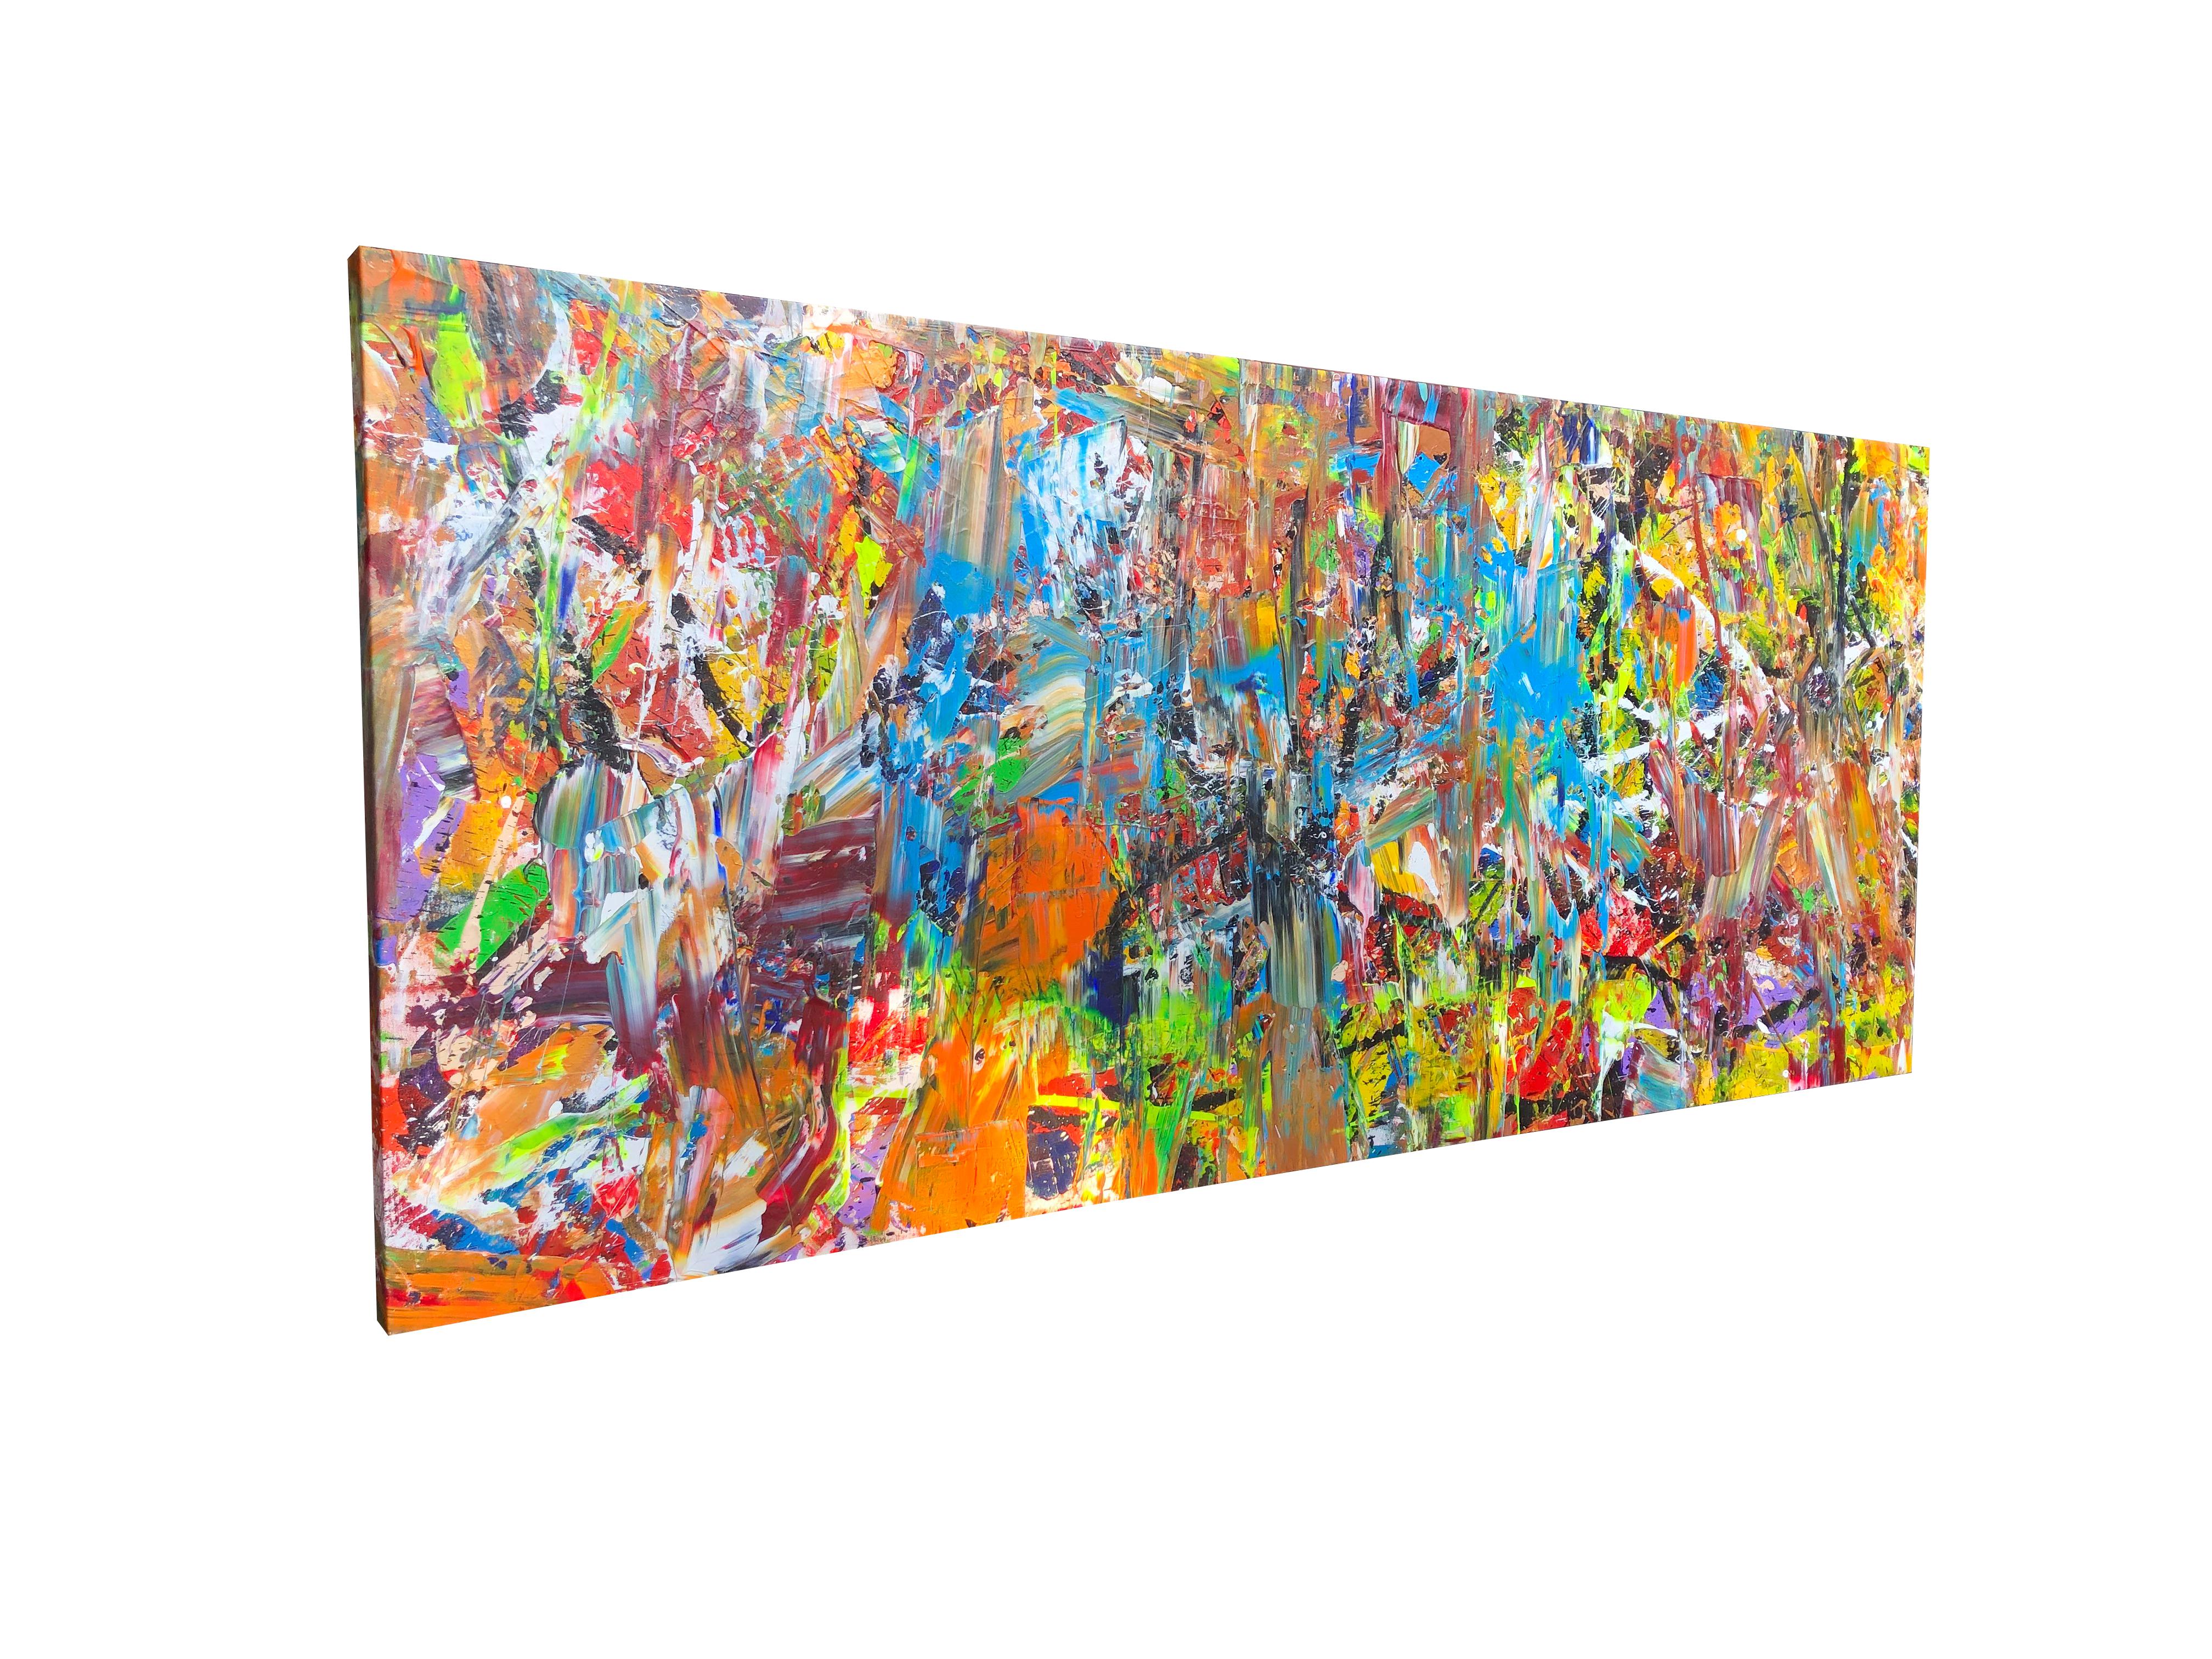 Modern Abstract Expressionist Painting with Vivid Colors Orange Blue Red Green White